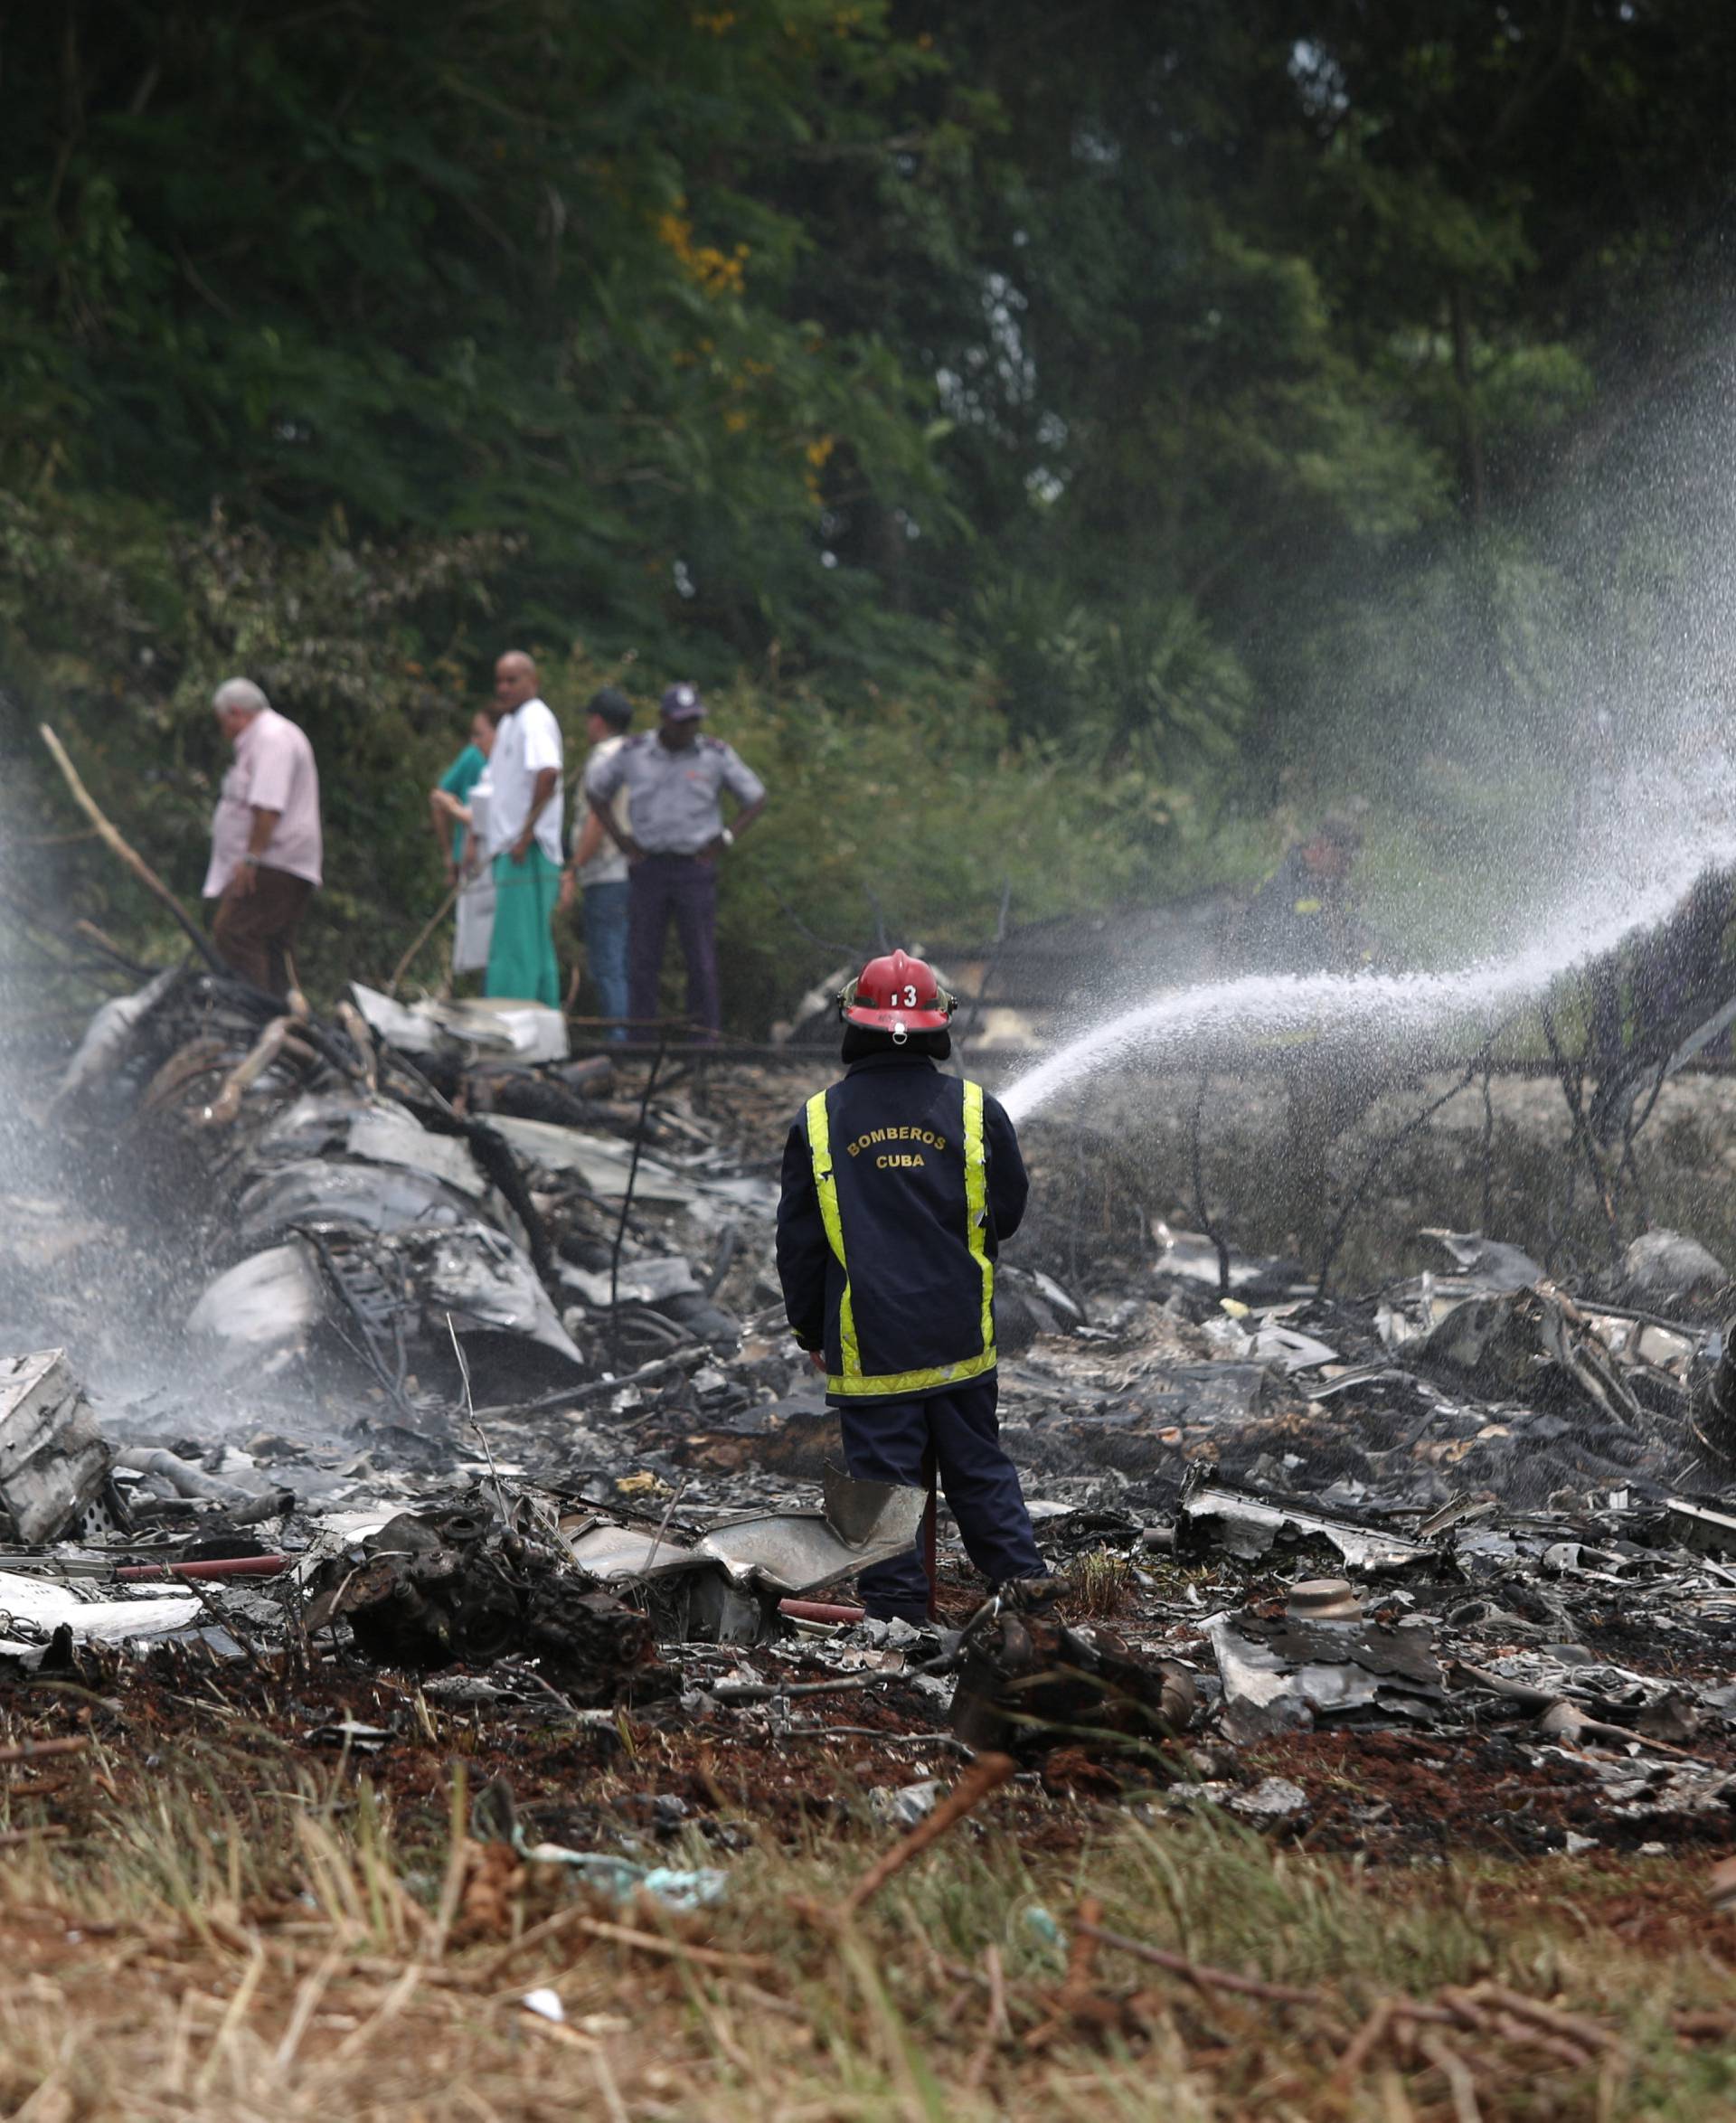 A fire fighter works in the wreckage of a Boeing 737 plane that crashed  in the agricultural area of Boyeros, some 20 km (12 miles) south of Havana on Friday shortly after taking off from Havana's main airport in Cuba